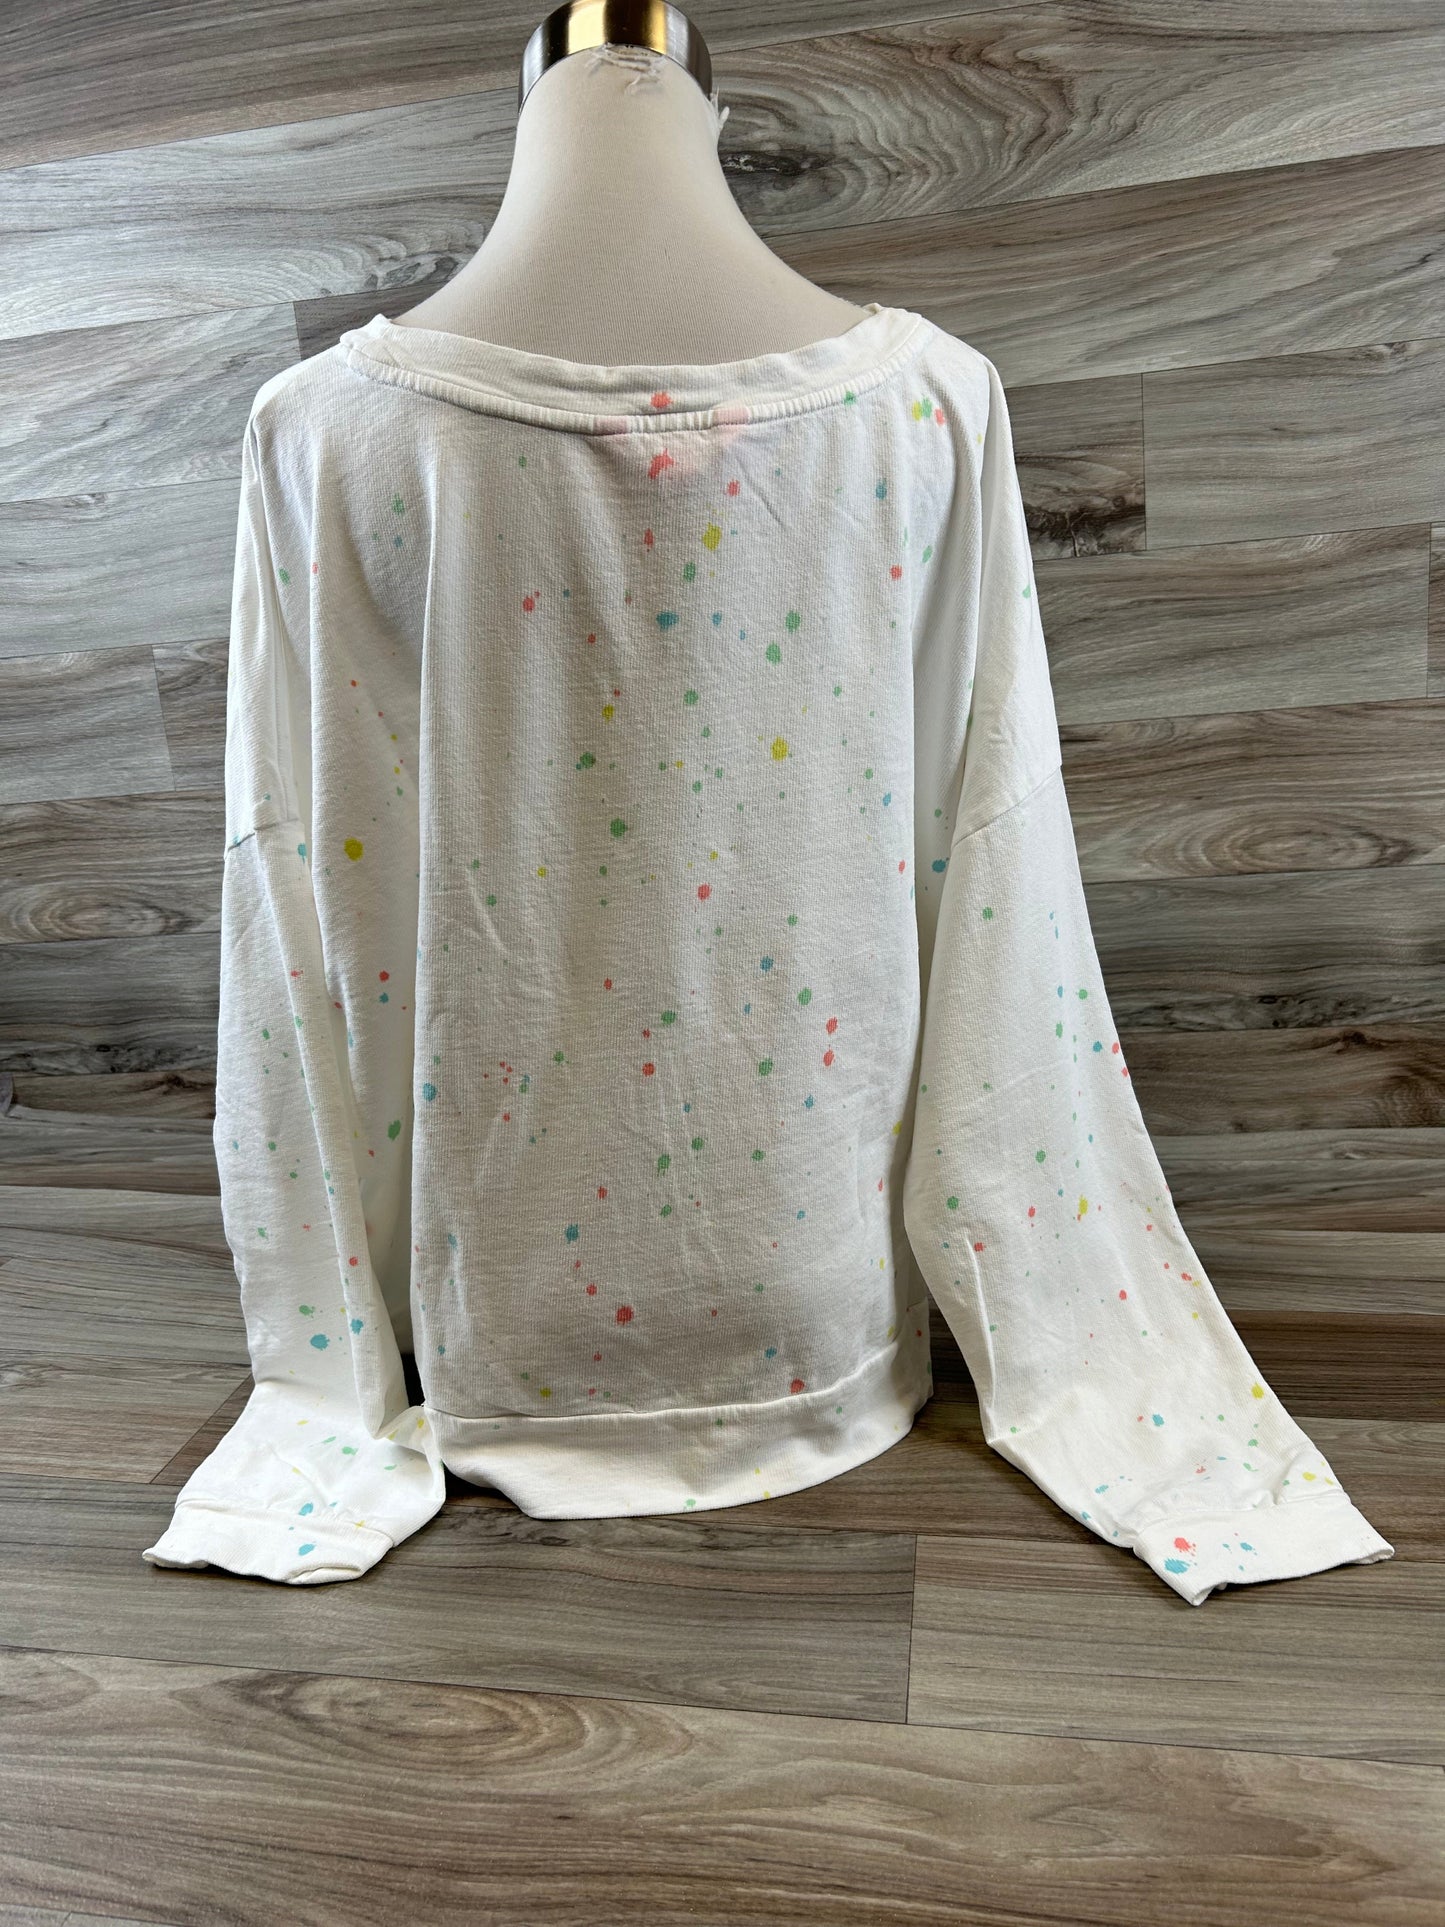 Multi-colored Top Long Sleeve Designer Lilly Pulitzer, Size Xl